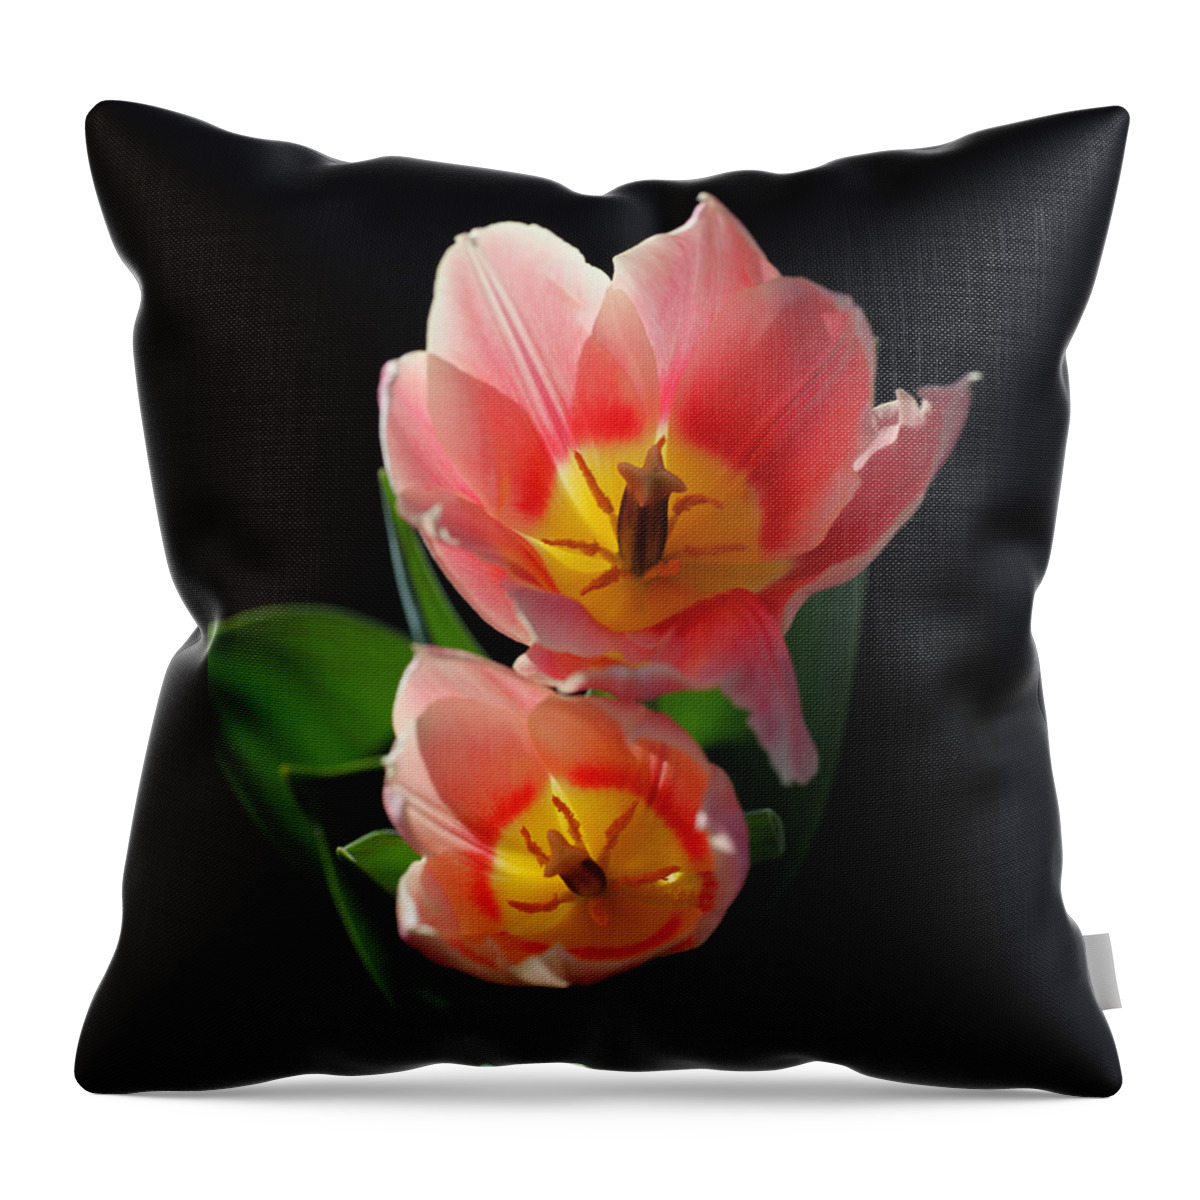 Tulips Throw Pillow featuring the photograph Tulips by Tammy Pool